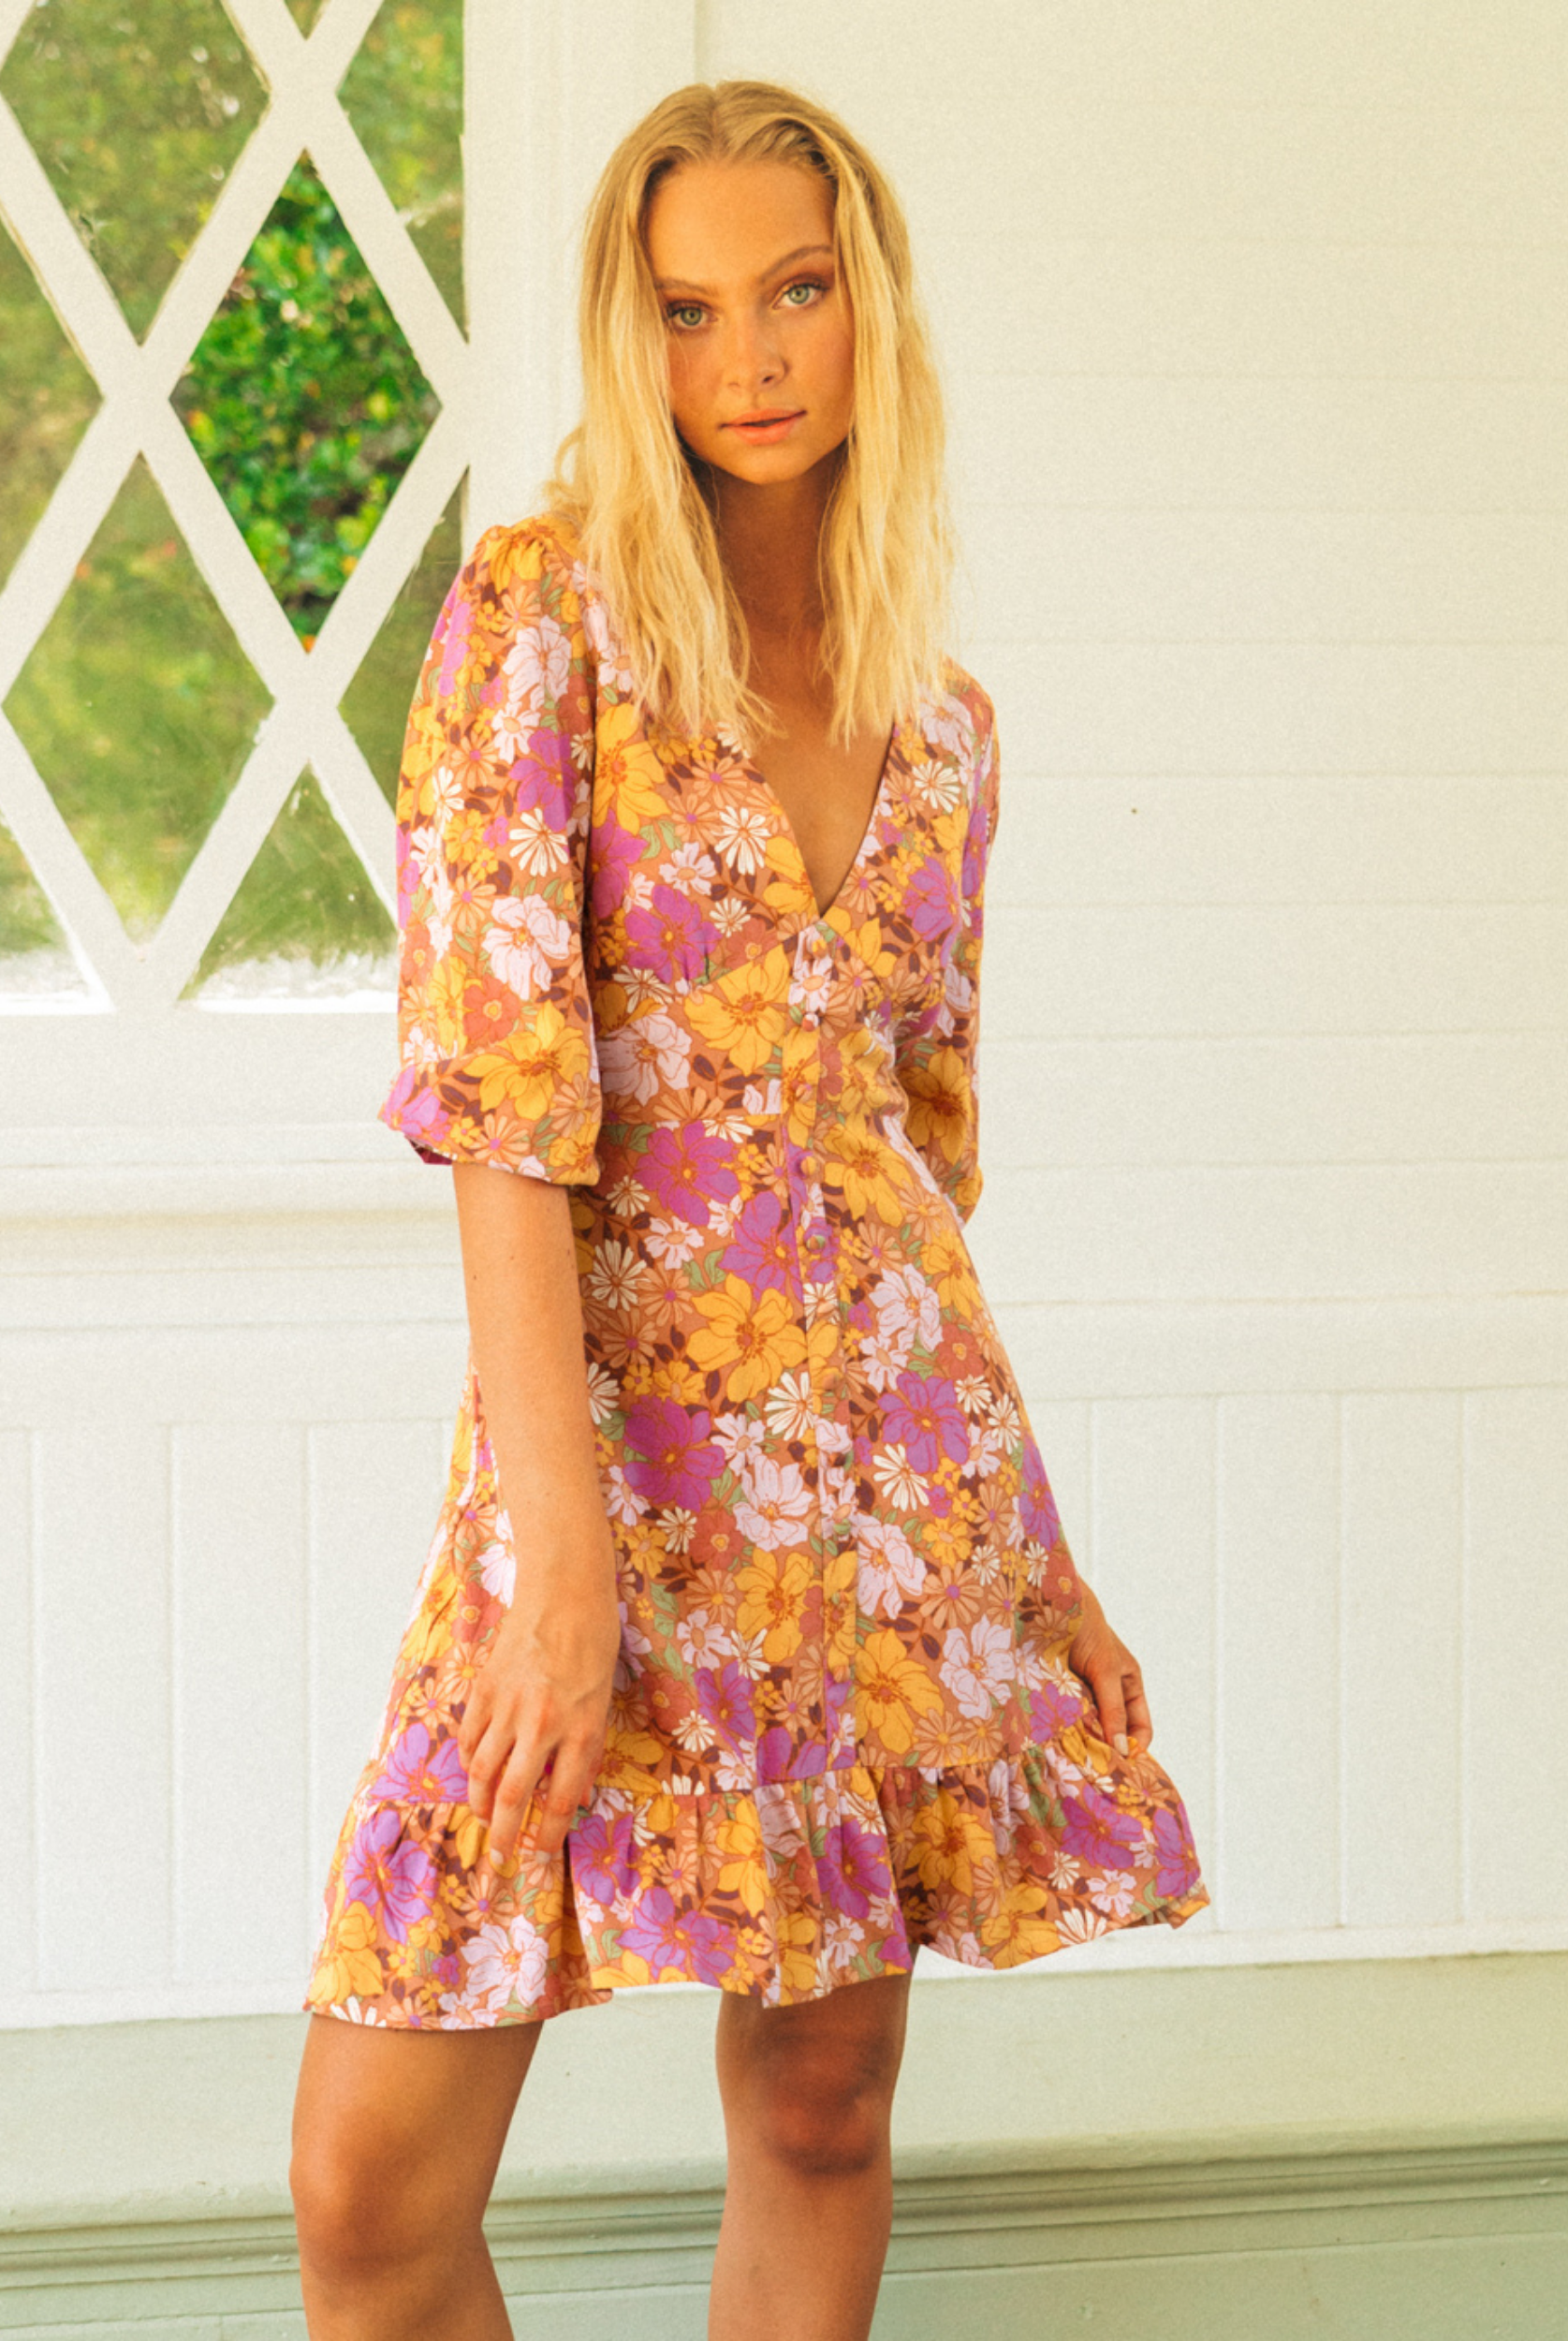 Floral Mini Dress with button detail at front, mid sleeves and a ruffle at the hemline.